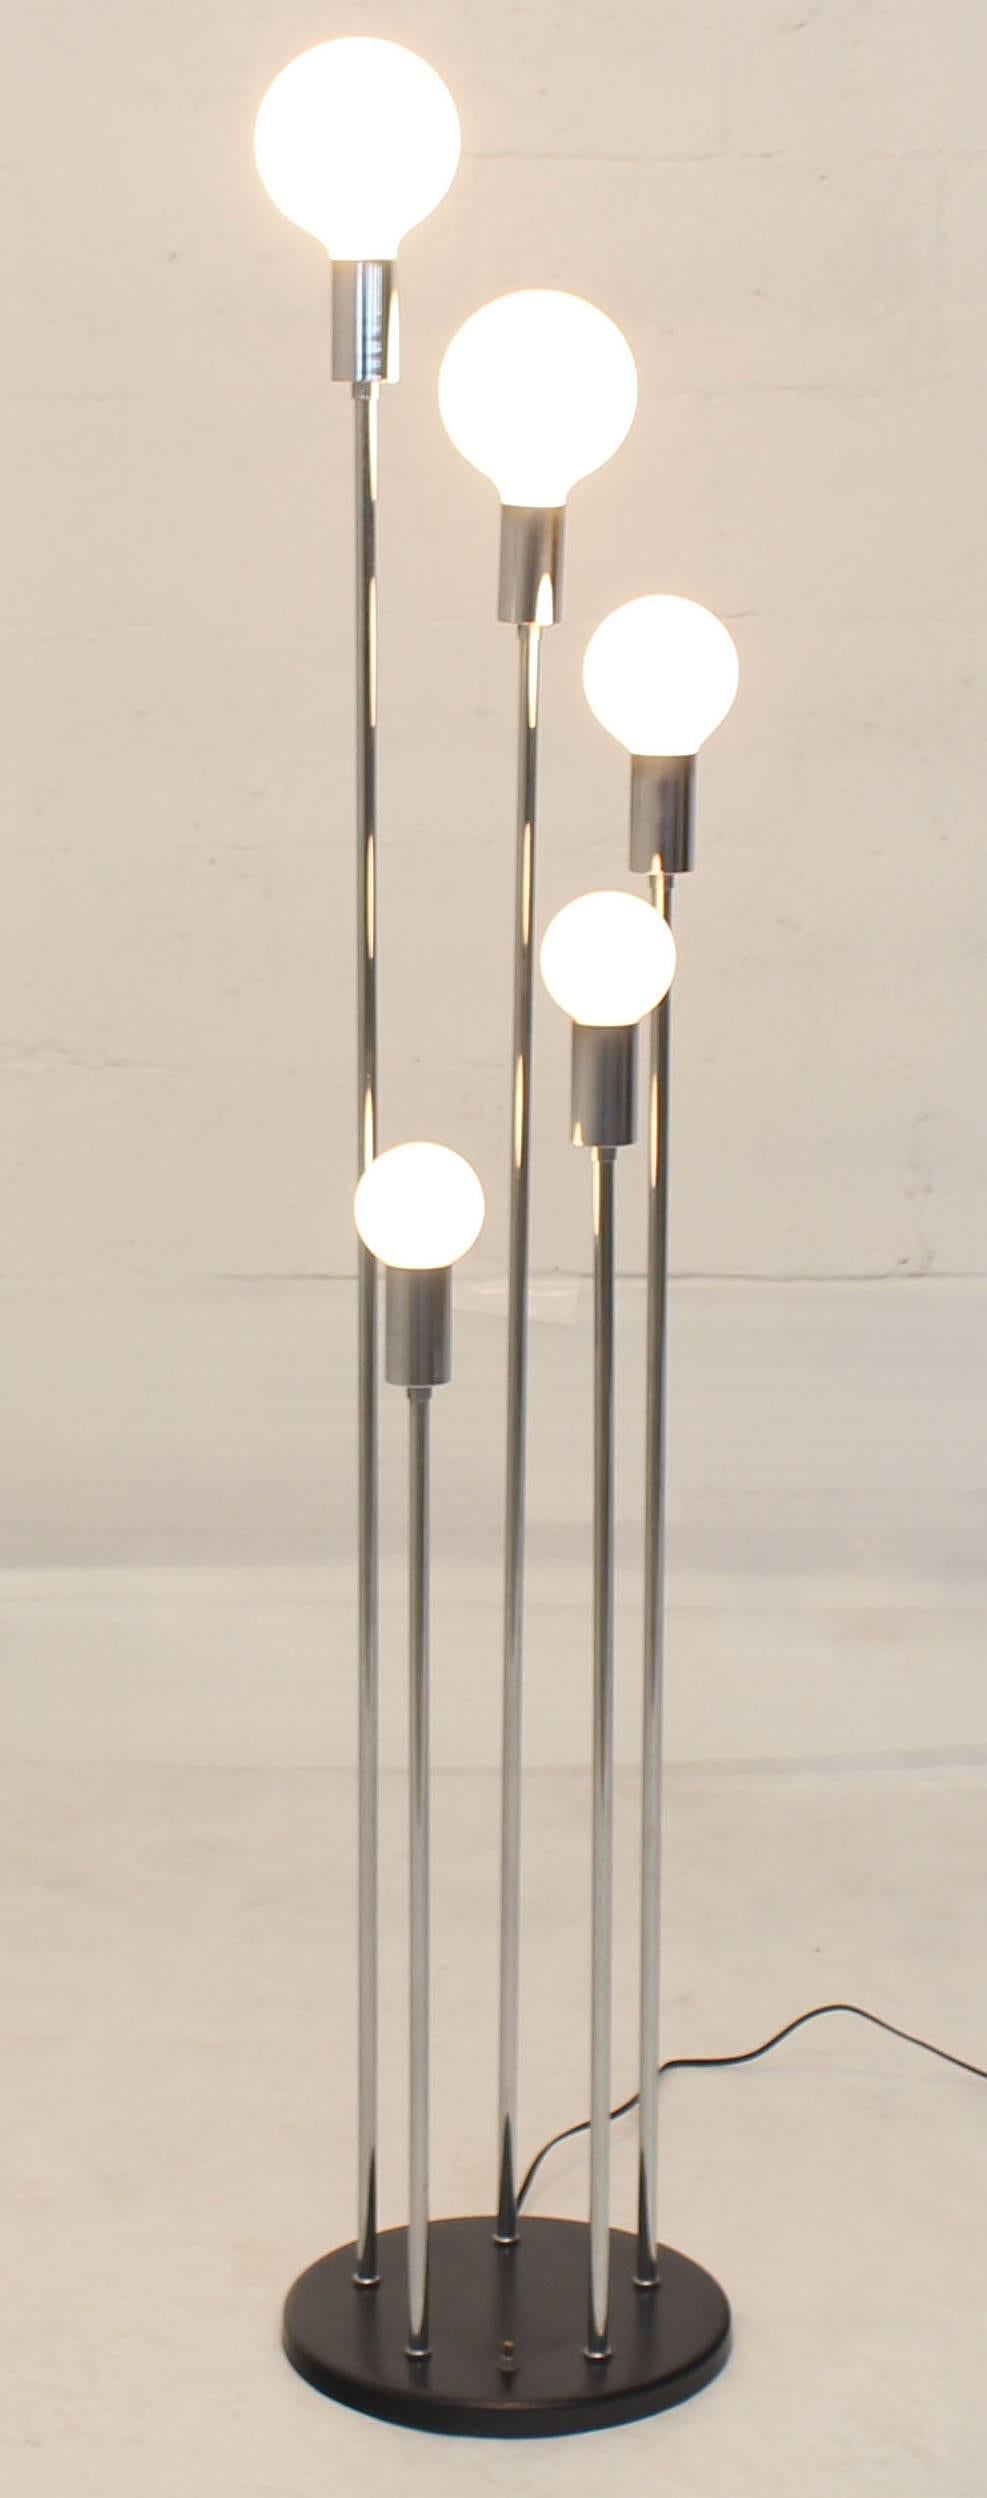 3 Way 5 Globes Spiral Chrome Mid Century Modern Floor Lamps on Round Base  In Good Condition In Rockaway, NJ